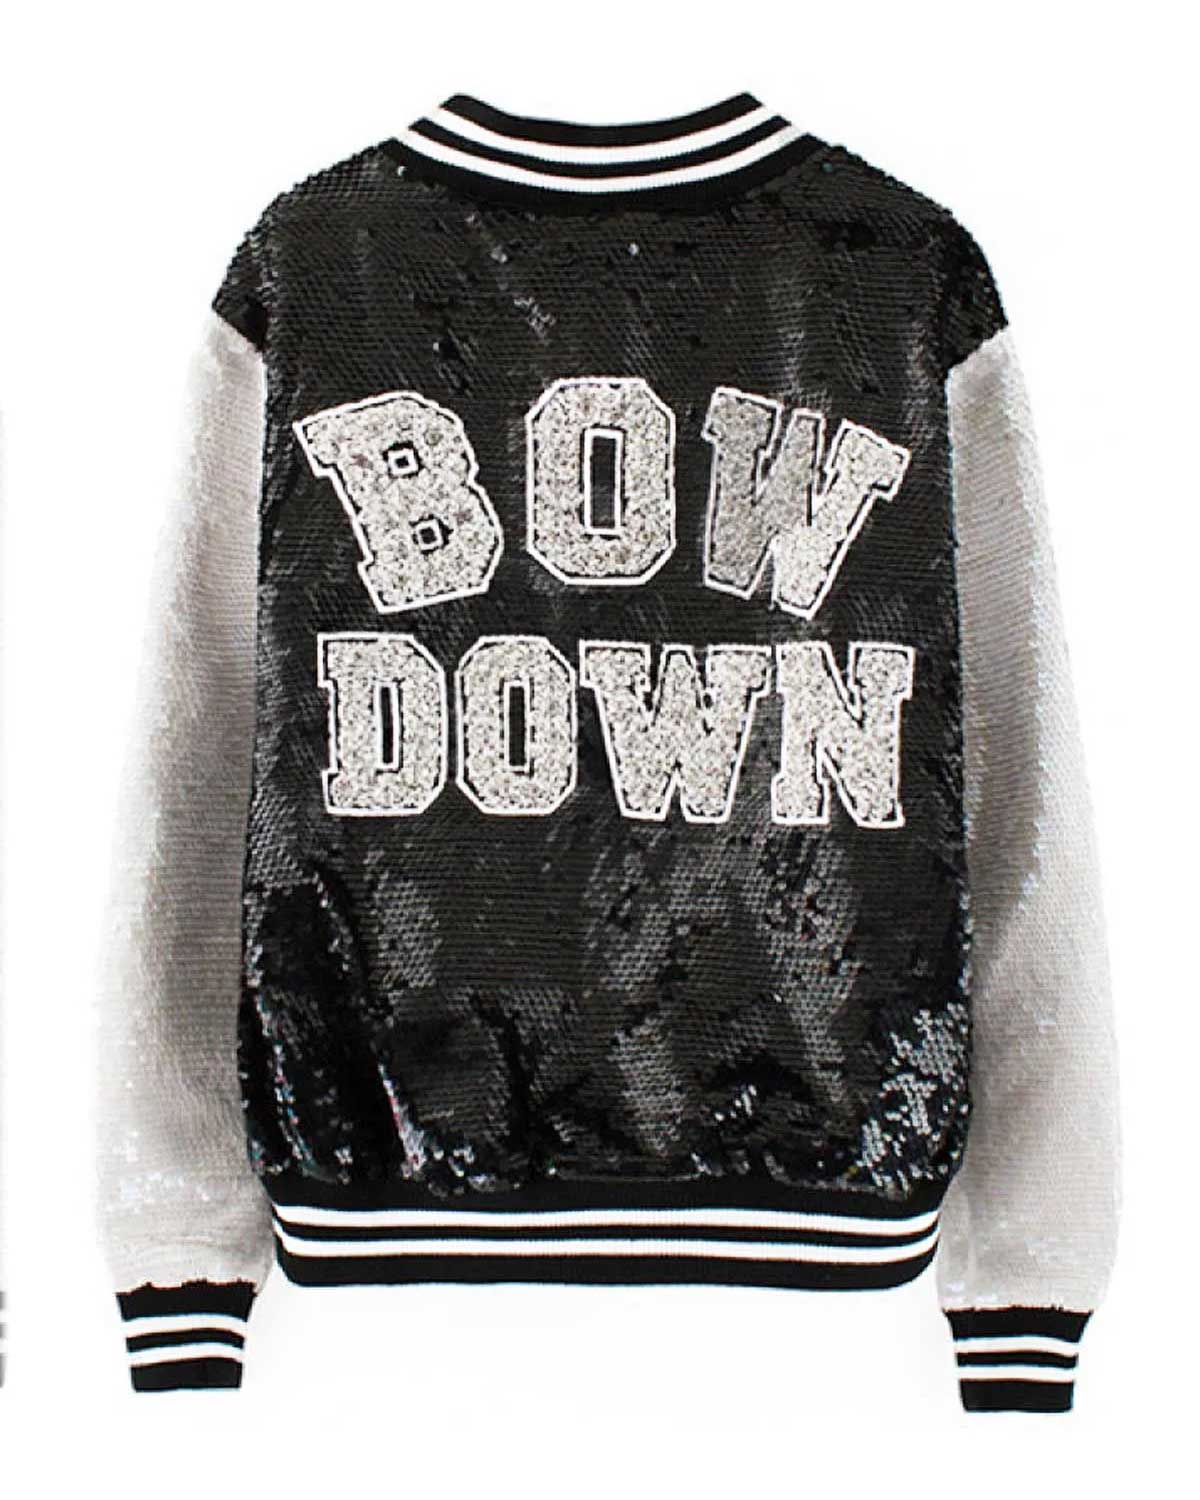 Beyonce Bow Down Black And White Sequin Jacket | Elite Jacket